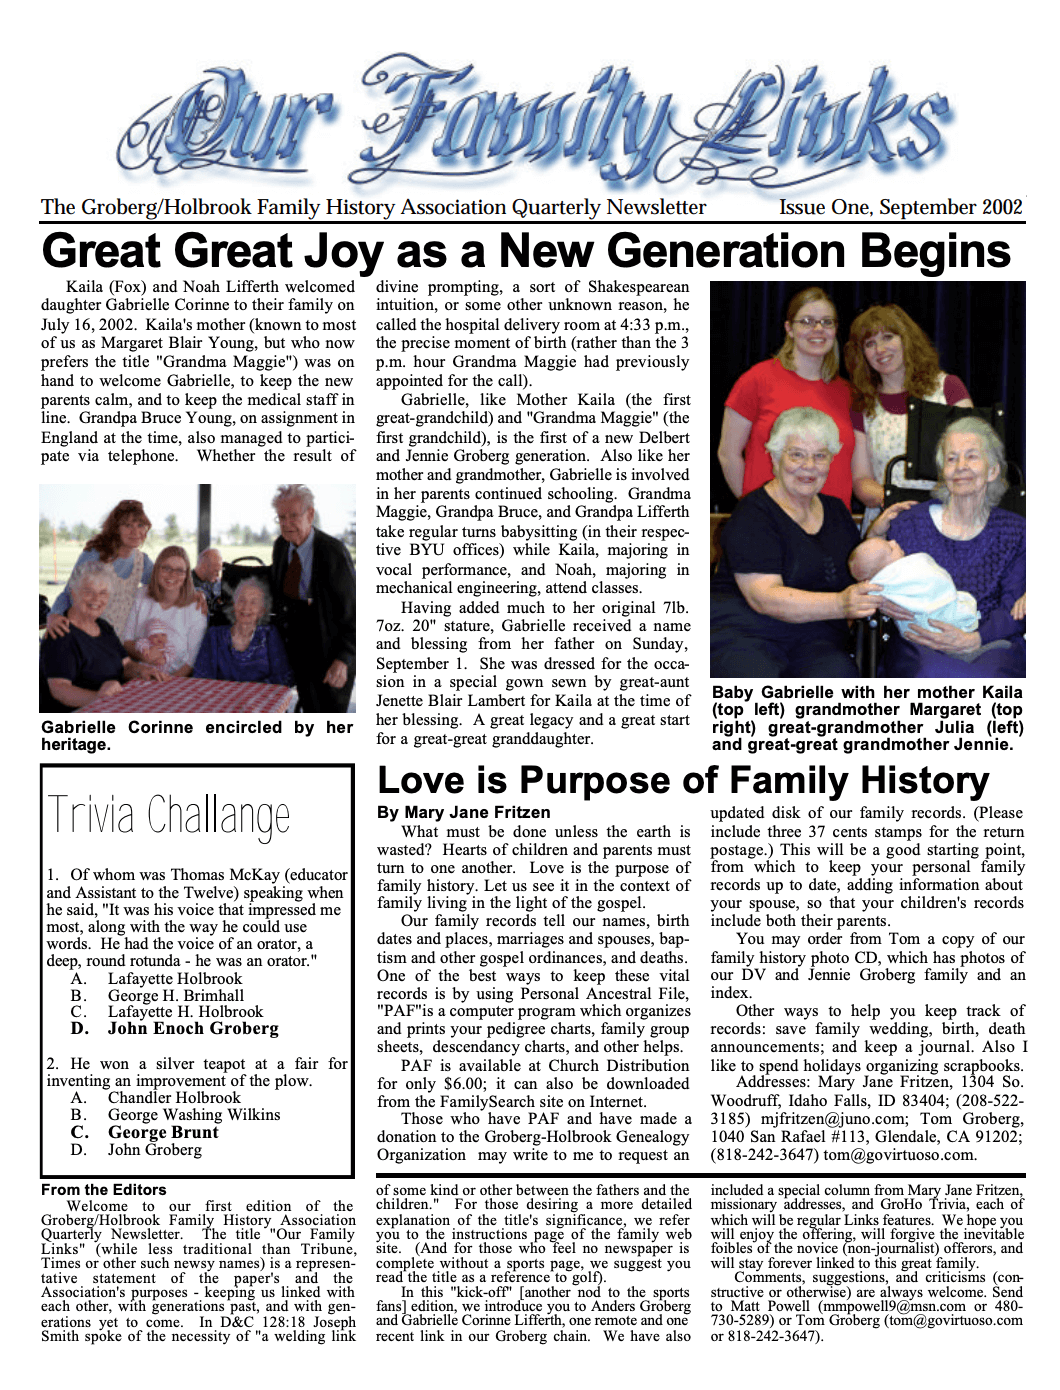 The front page of this issue's family newsletter